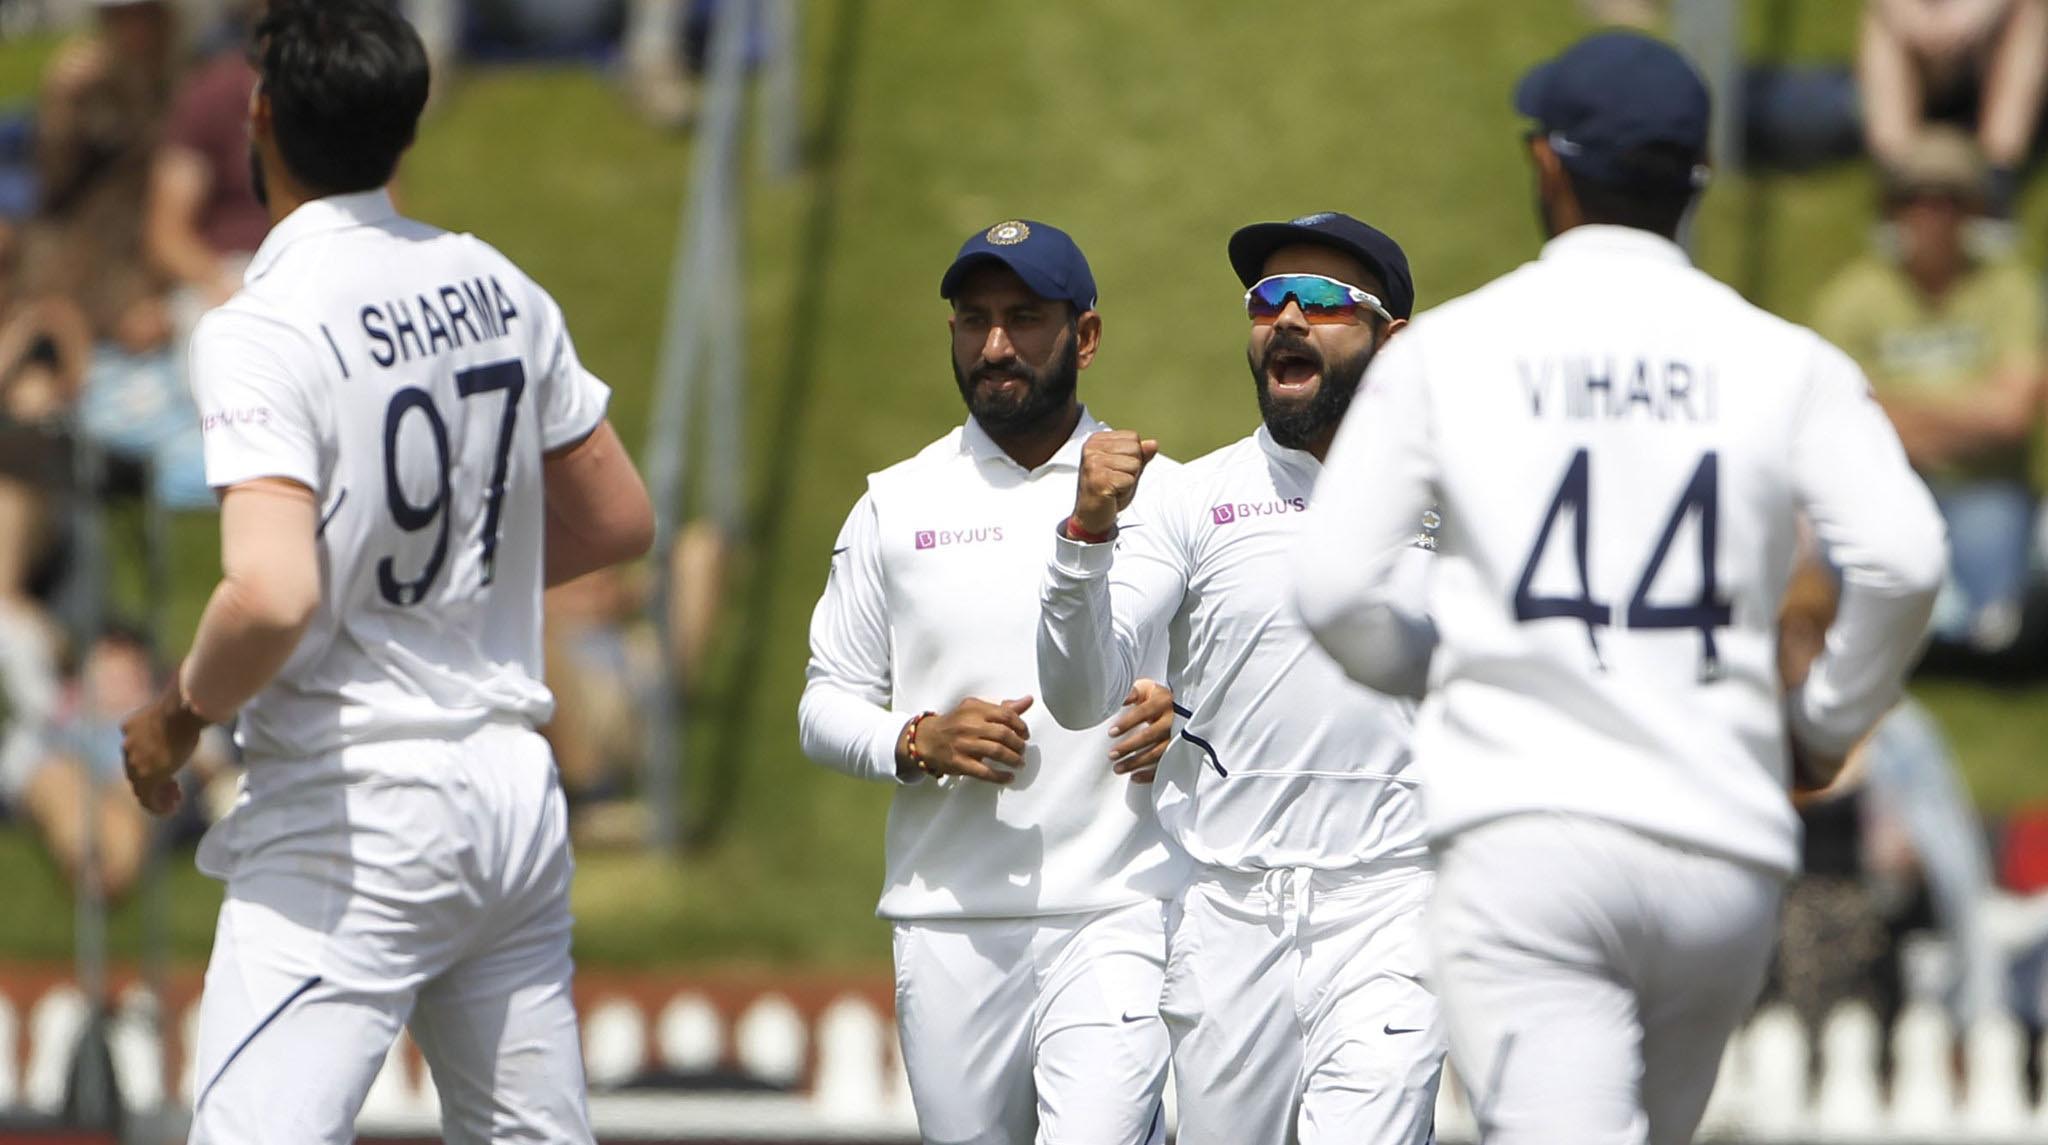 We were not competitive enough, admits Virat Kohli after losing 1st New Zealand Test